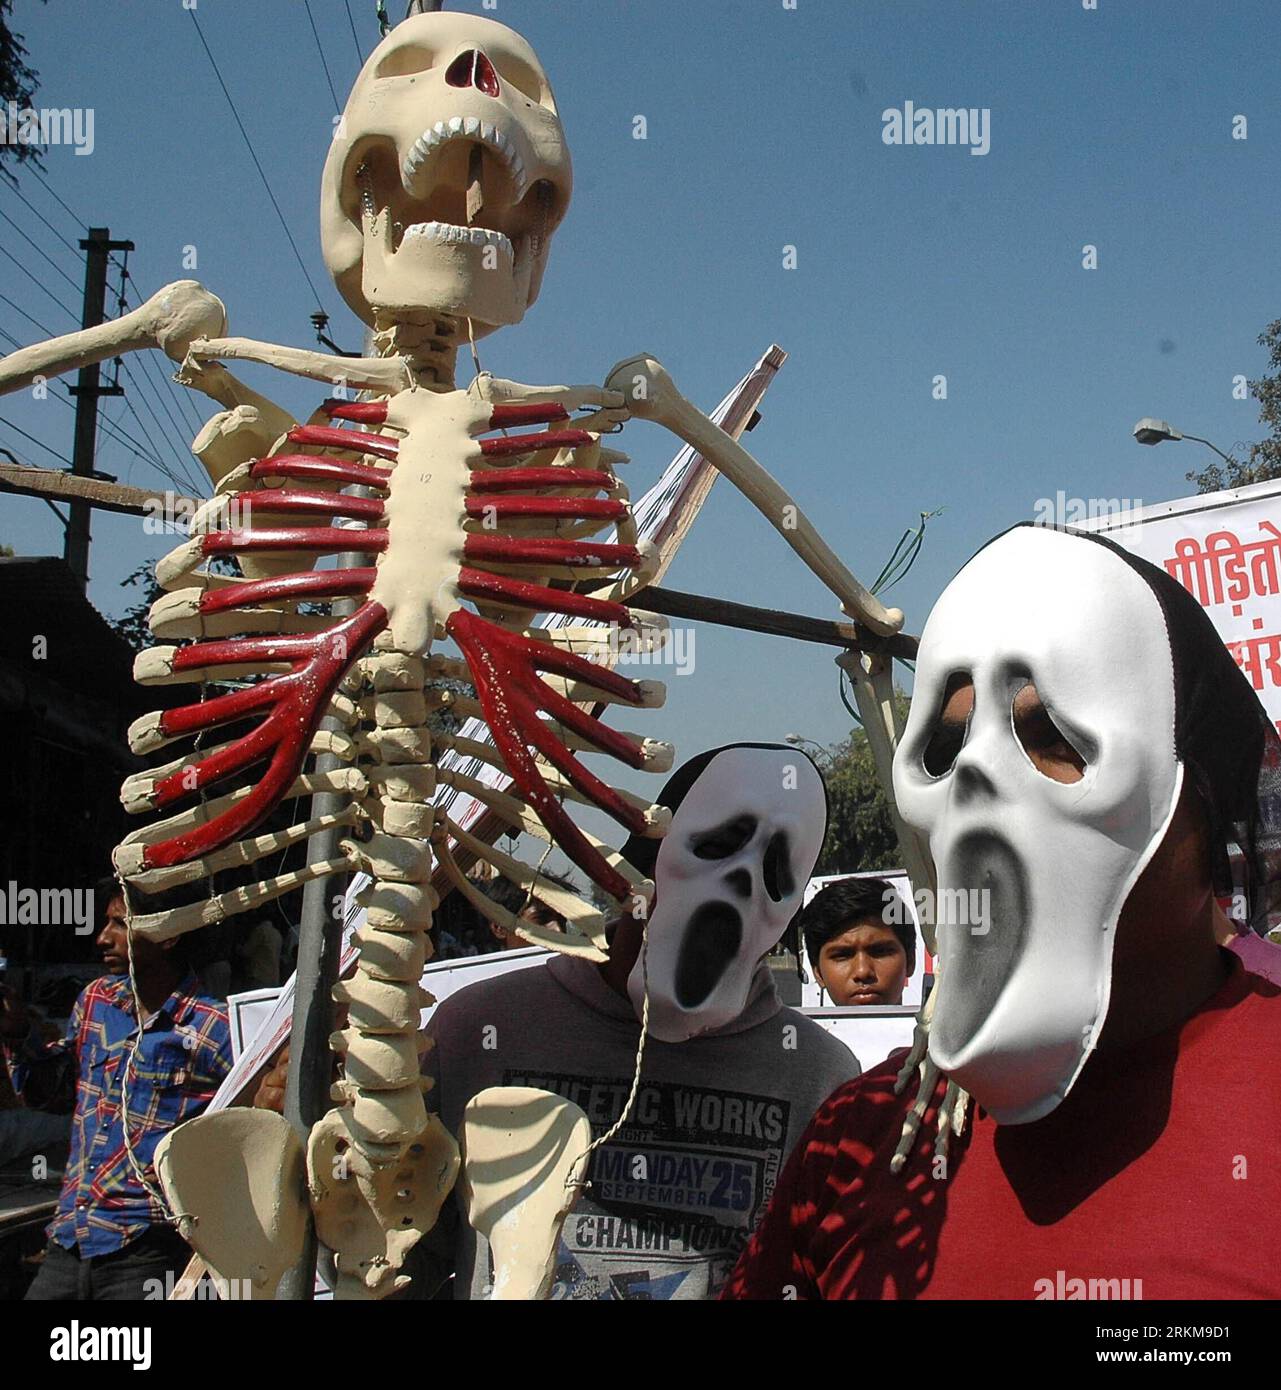 Bildnummer: 56575023  Datum: 02.11.2011  Copyright: imago/Xinhua (111203) -- BHOPAL, Dec. 3, 2011 (Xinhua) -- Activists wear ghost masks attend a demonstration demanding for compensation and employment to all survivor gas victims on the 27th anniversary of the gas disaster in Bhopal, India, December 2, 2011. Gas leak from the Union Carbide plant in Bhopal on the night of 2-3 December 1984 killed thousands of and caused several thousands became physically handicapped. (Xinhua) (yc) INDIA-BHOPAL-GAS DISASTER-ANNIVERSARY PUBLICATIONxNOTxINxCHN Gesellschaft Jahrestag 27 Giftgas Katastrophe Unglück Stock Photo